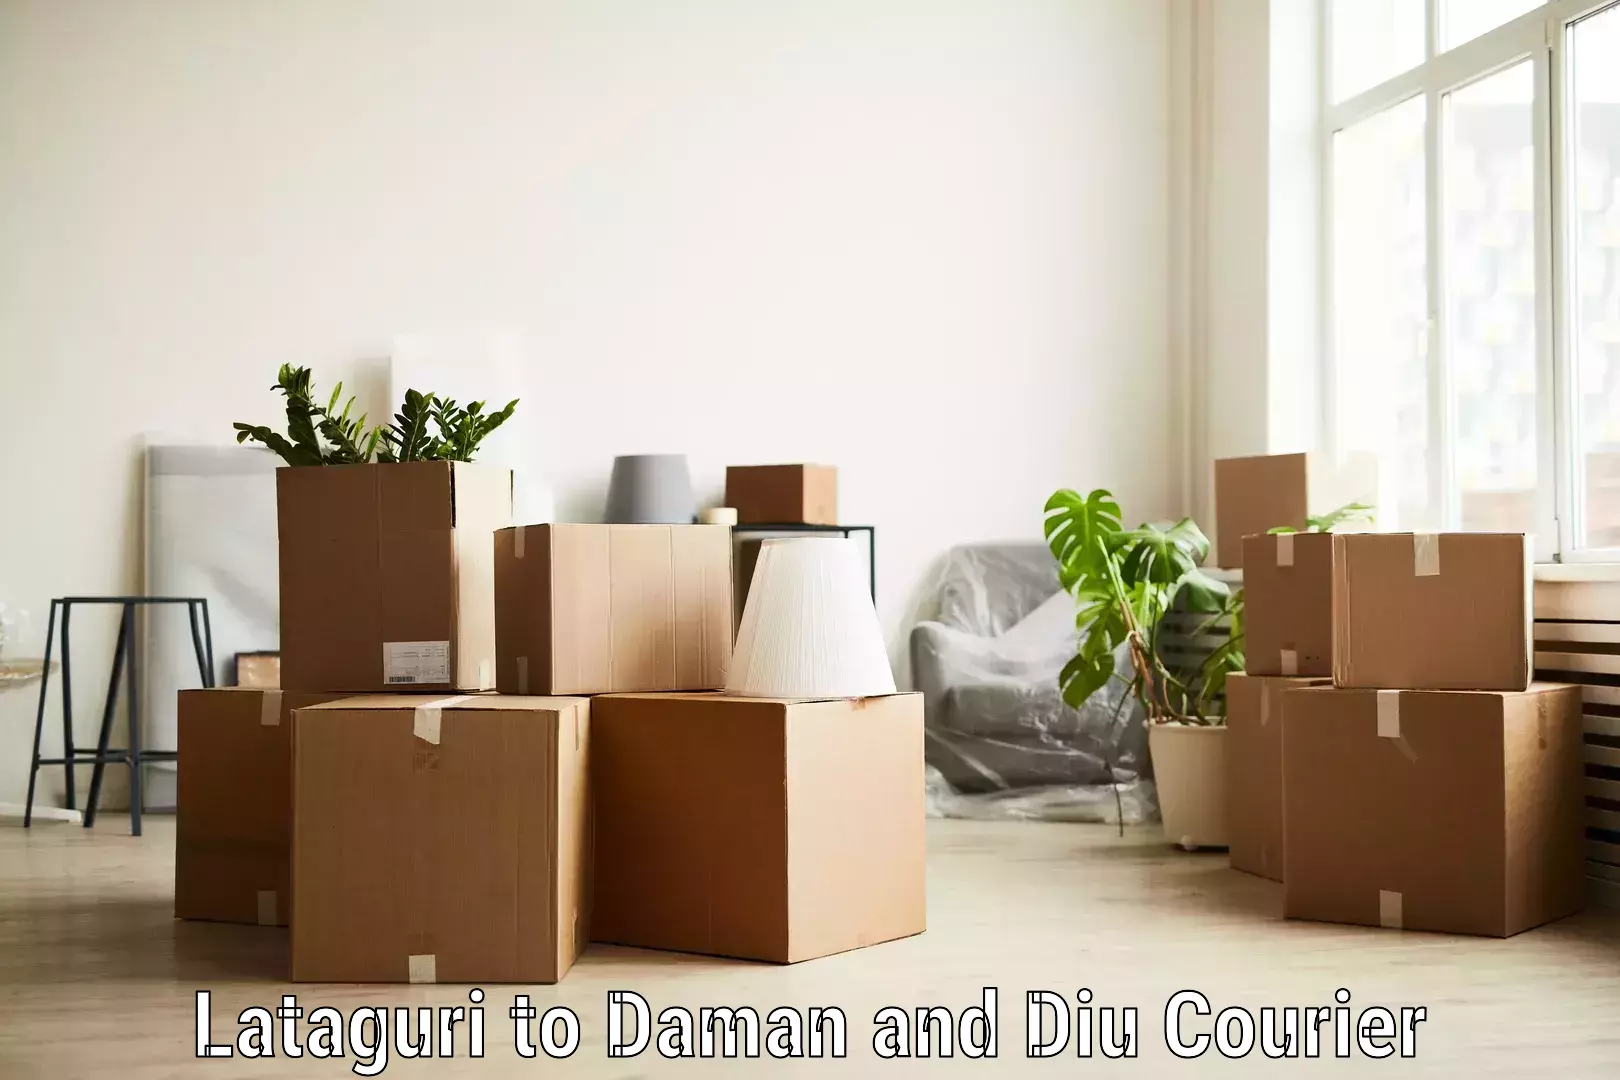 Residential courier service Lataguri to Diu